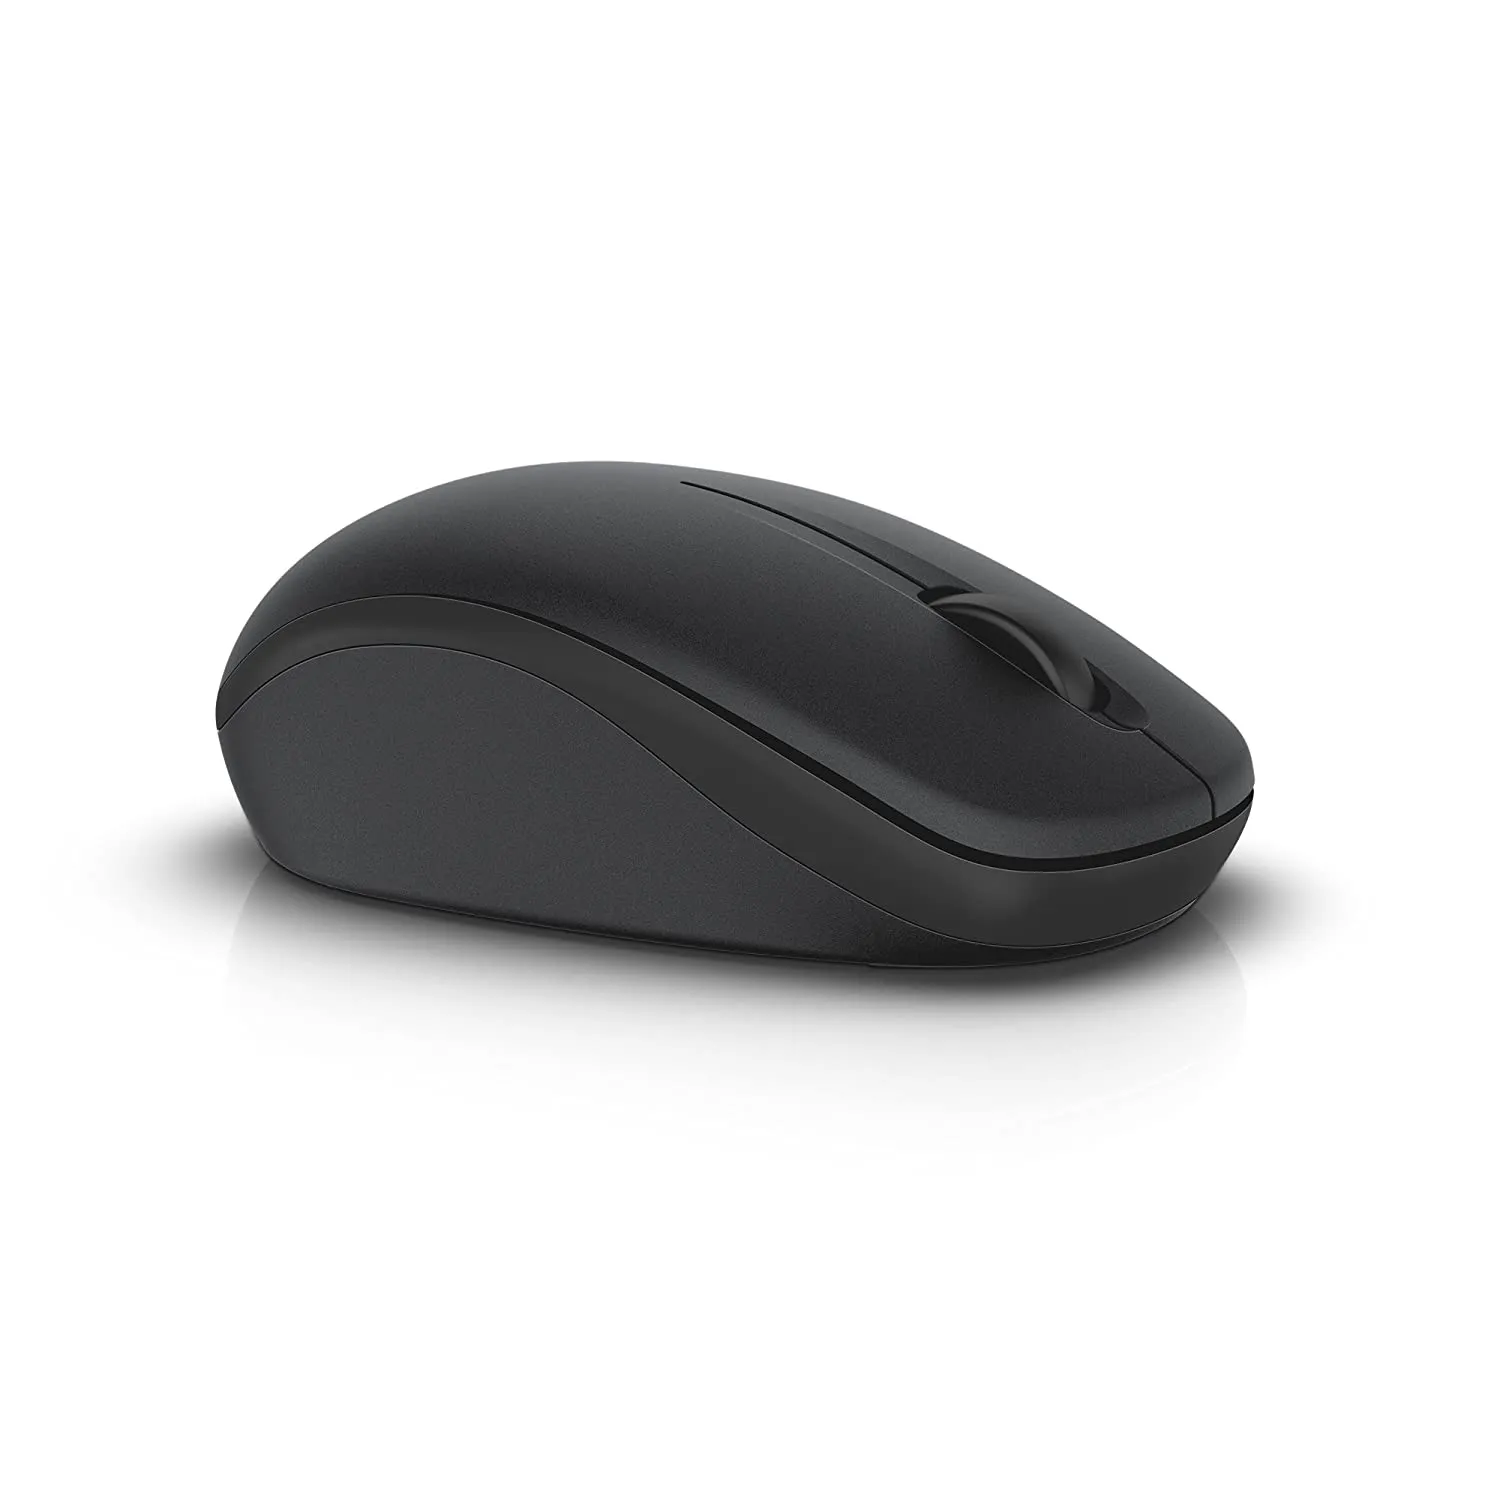 Dell WM126 Wireless Optical Performance Mouse, Black